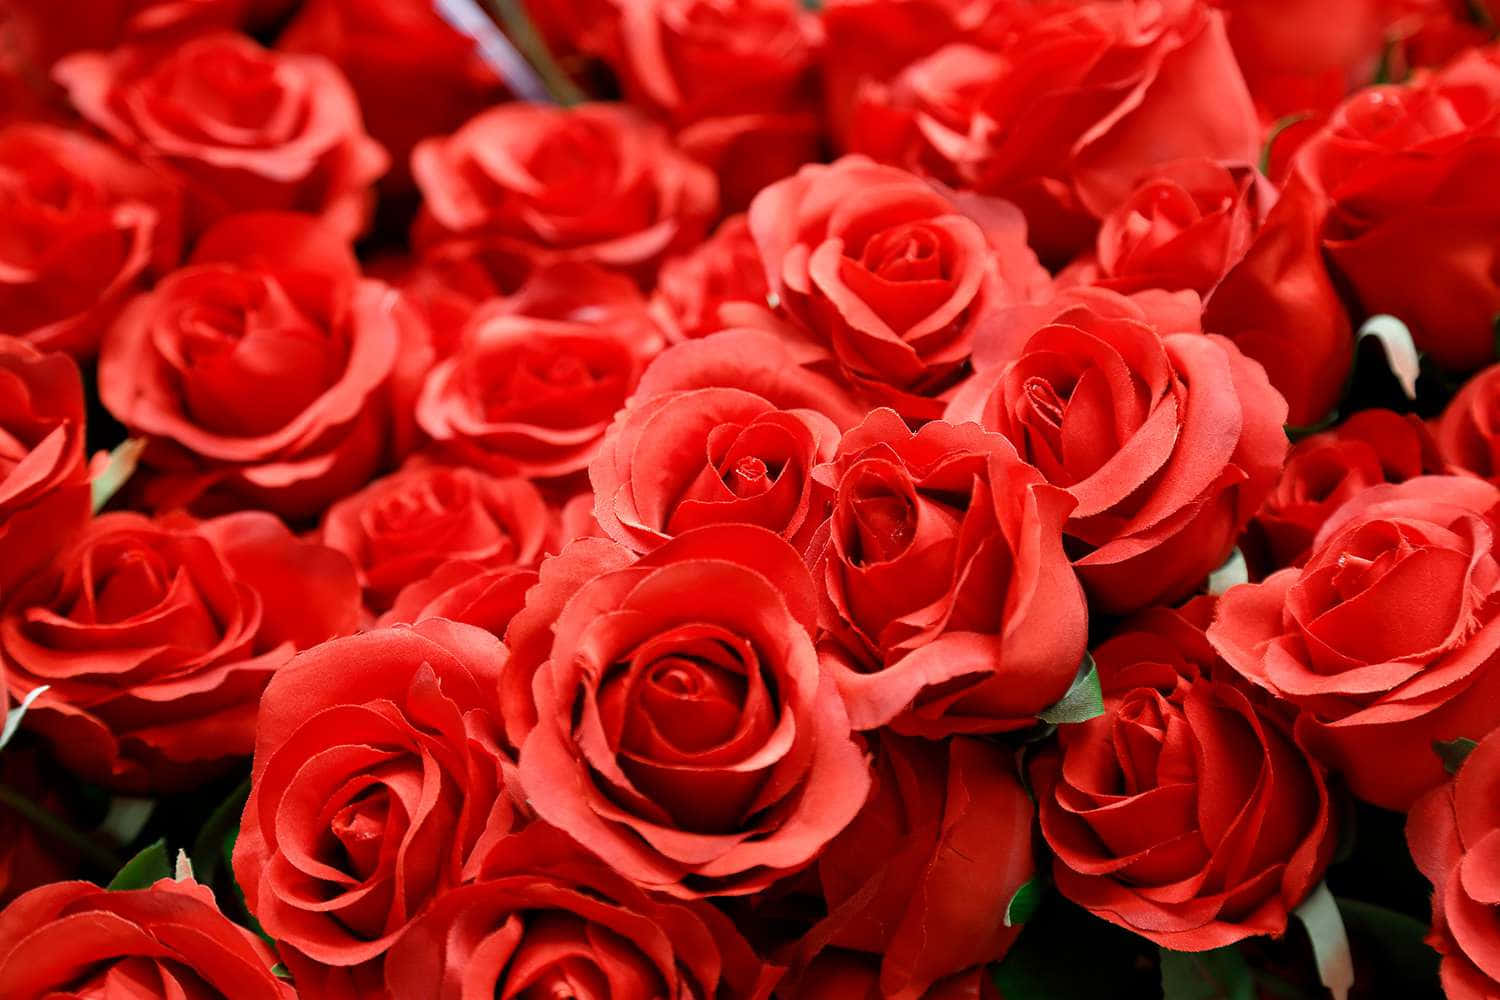 Bunch Of Red Rose Flowers Valentine's Day Pictures 1500 x 1000 Picture